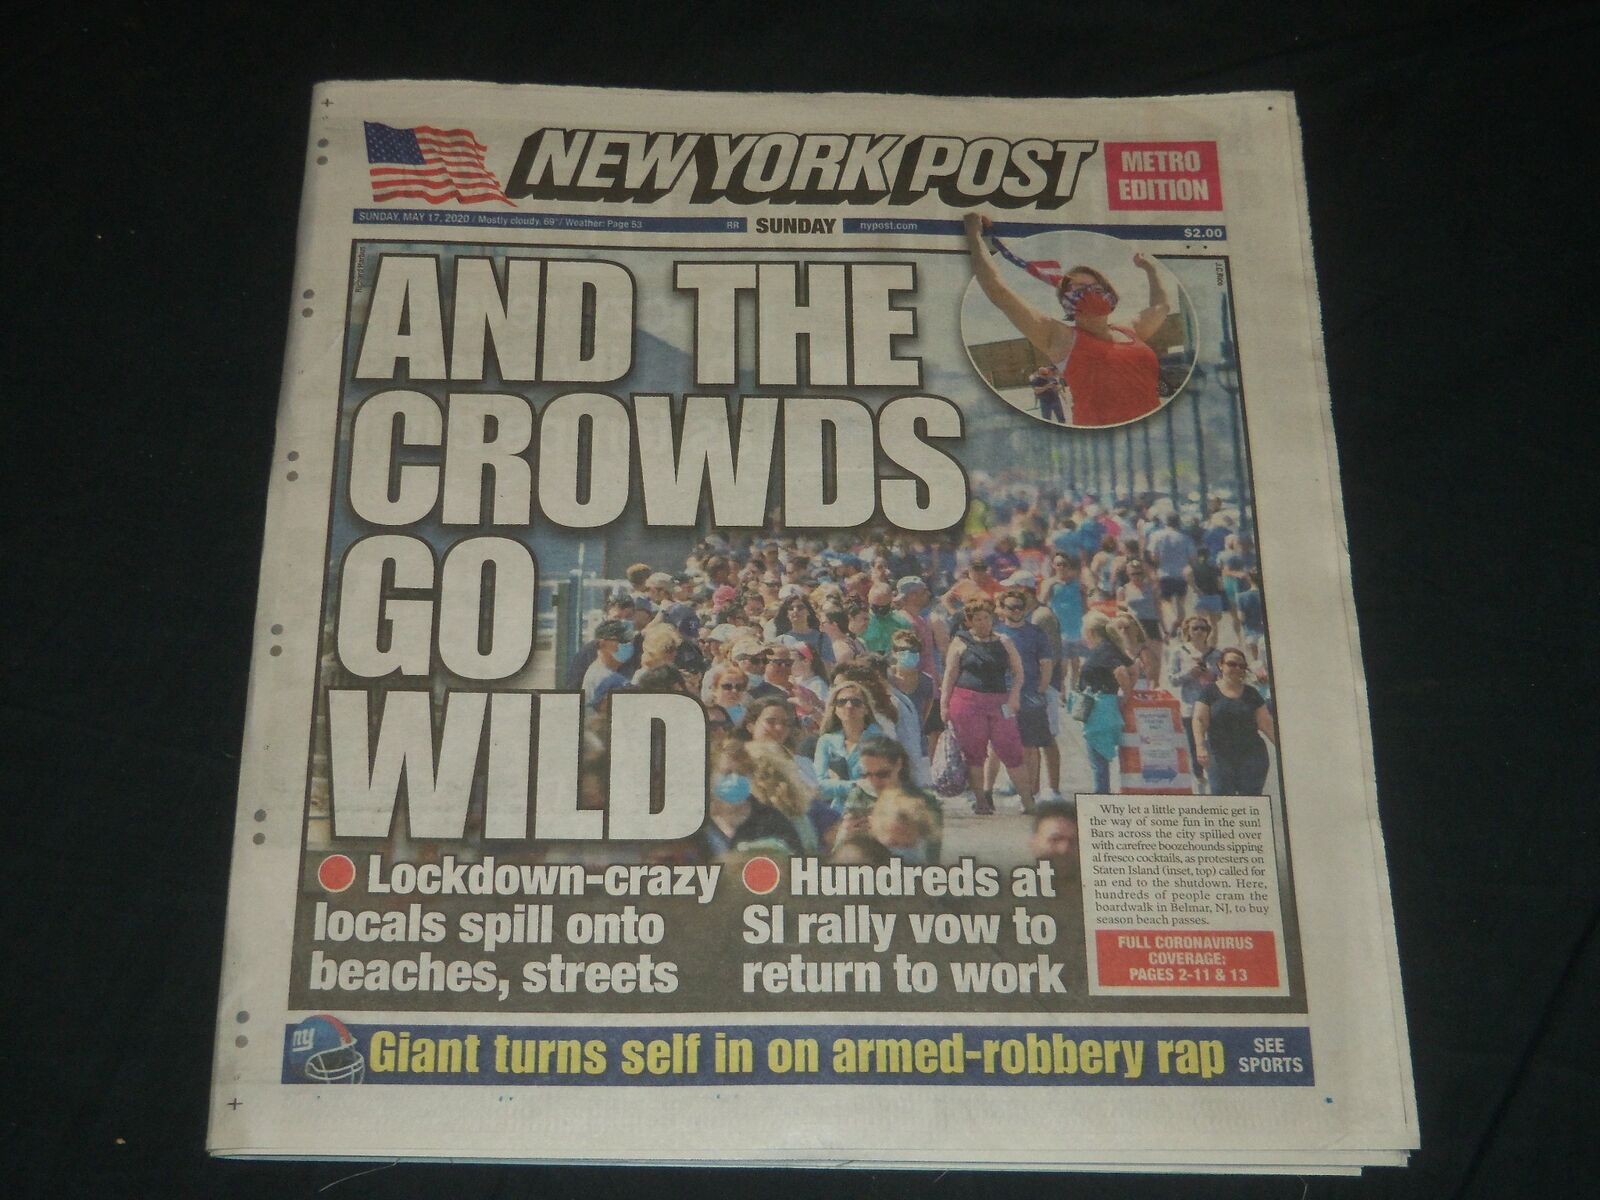 2020 MAY 17 NEW YORK POST NEWSPAPER - AND THE CROWDS GO WILD - LOCKDOWN-CRAZY